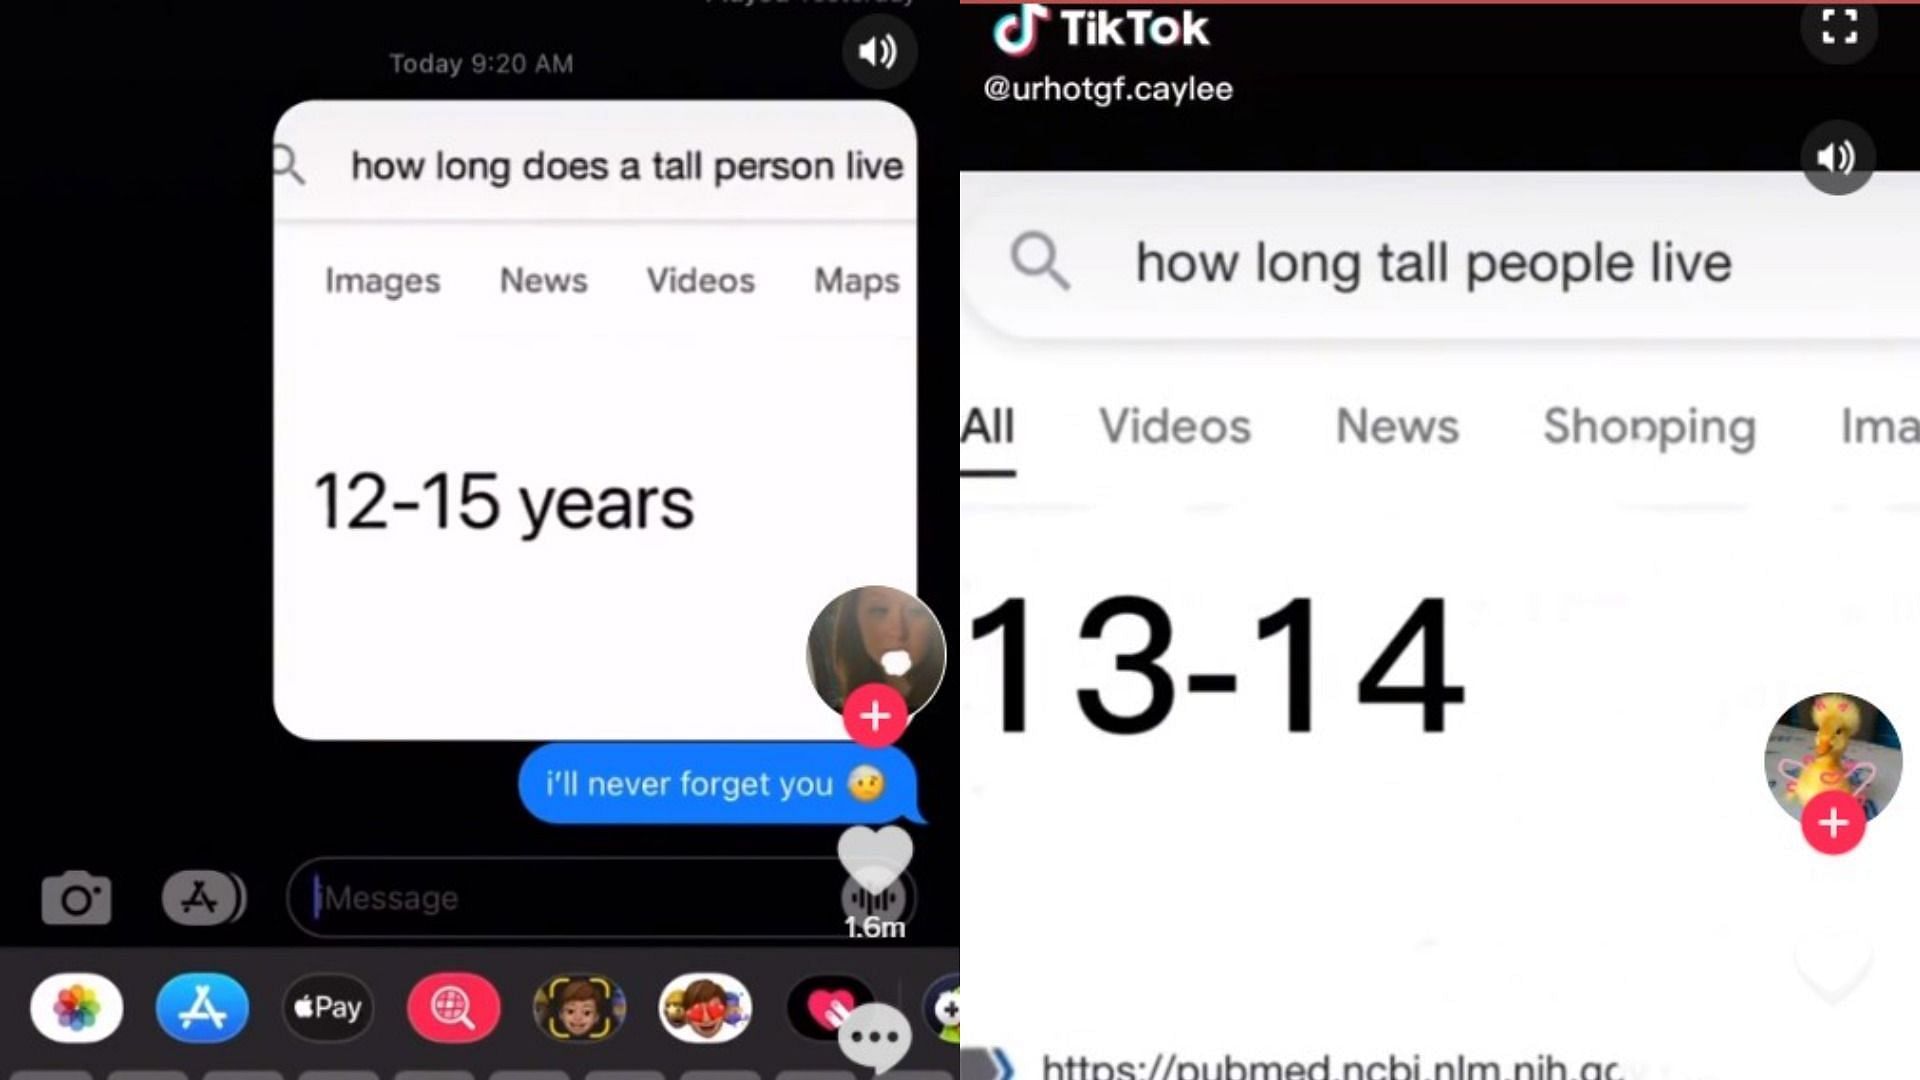 Users prank their tall friends with the "how long does a tall person live" meme (Images via youregonnabealr/TikTok and urhotgf.caylee/TikTok)